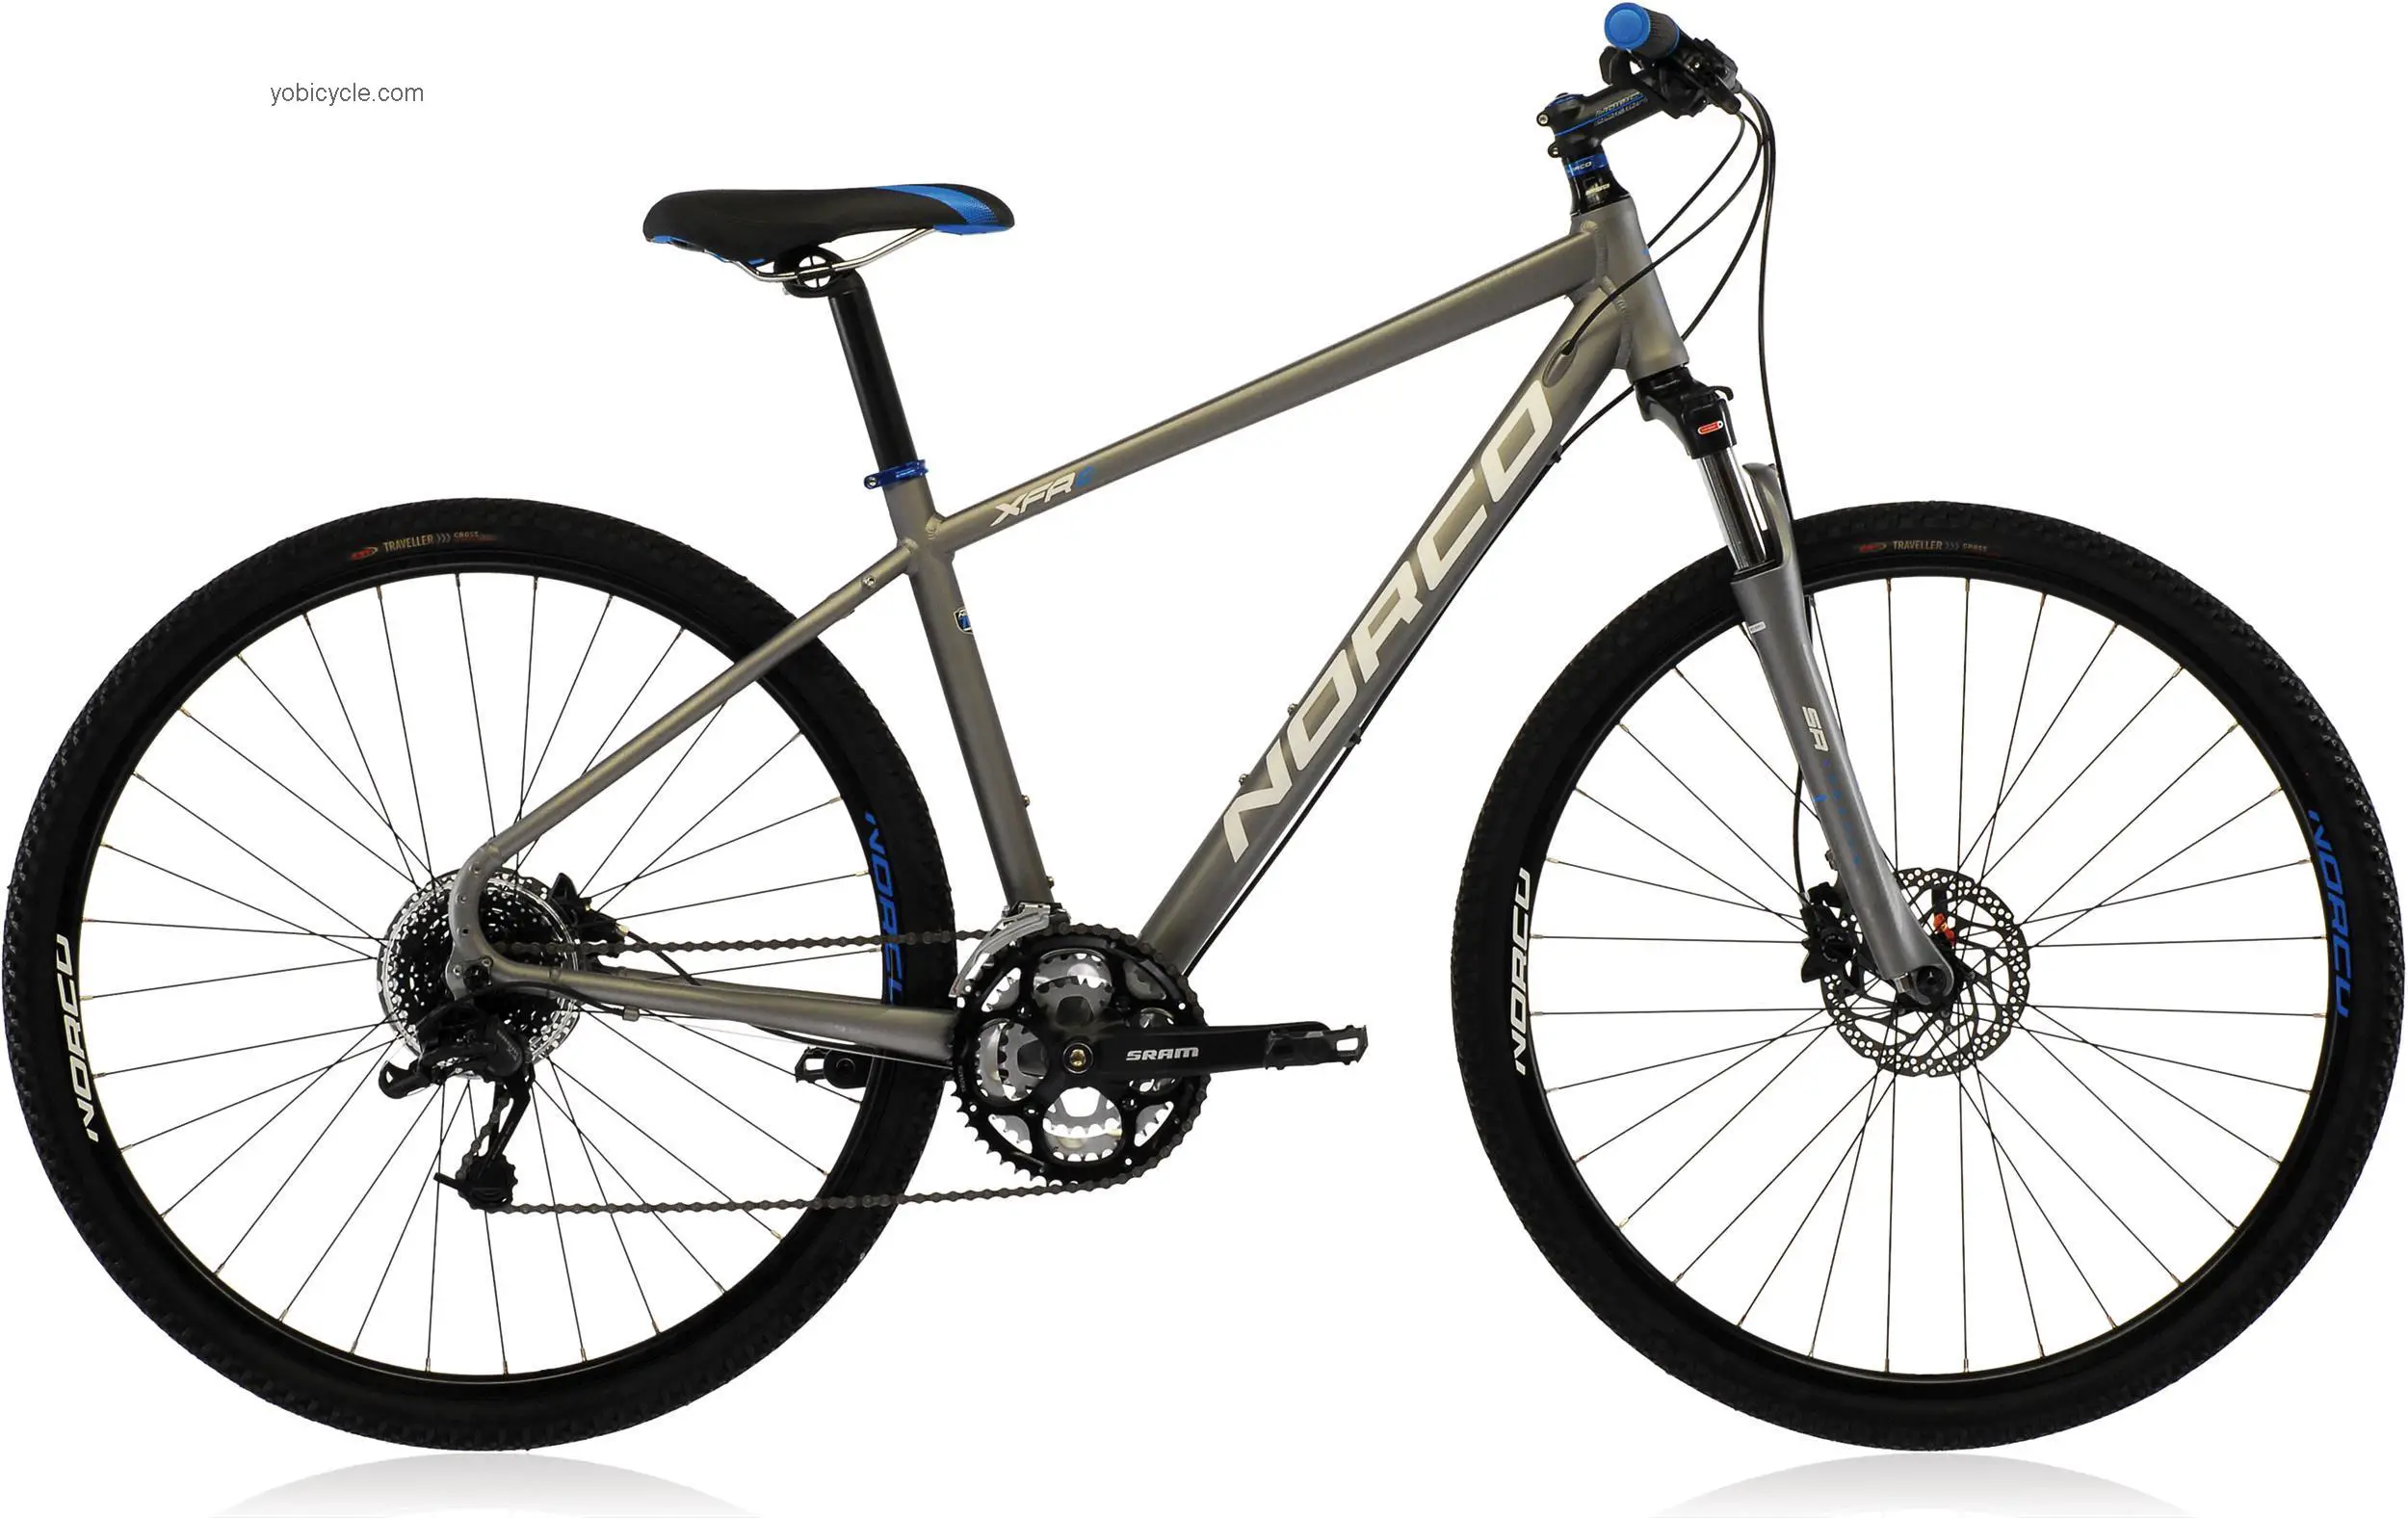 Norco XFR 3 2013 comparison online with competitors